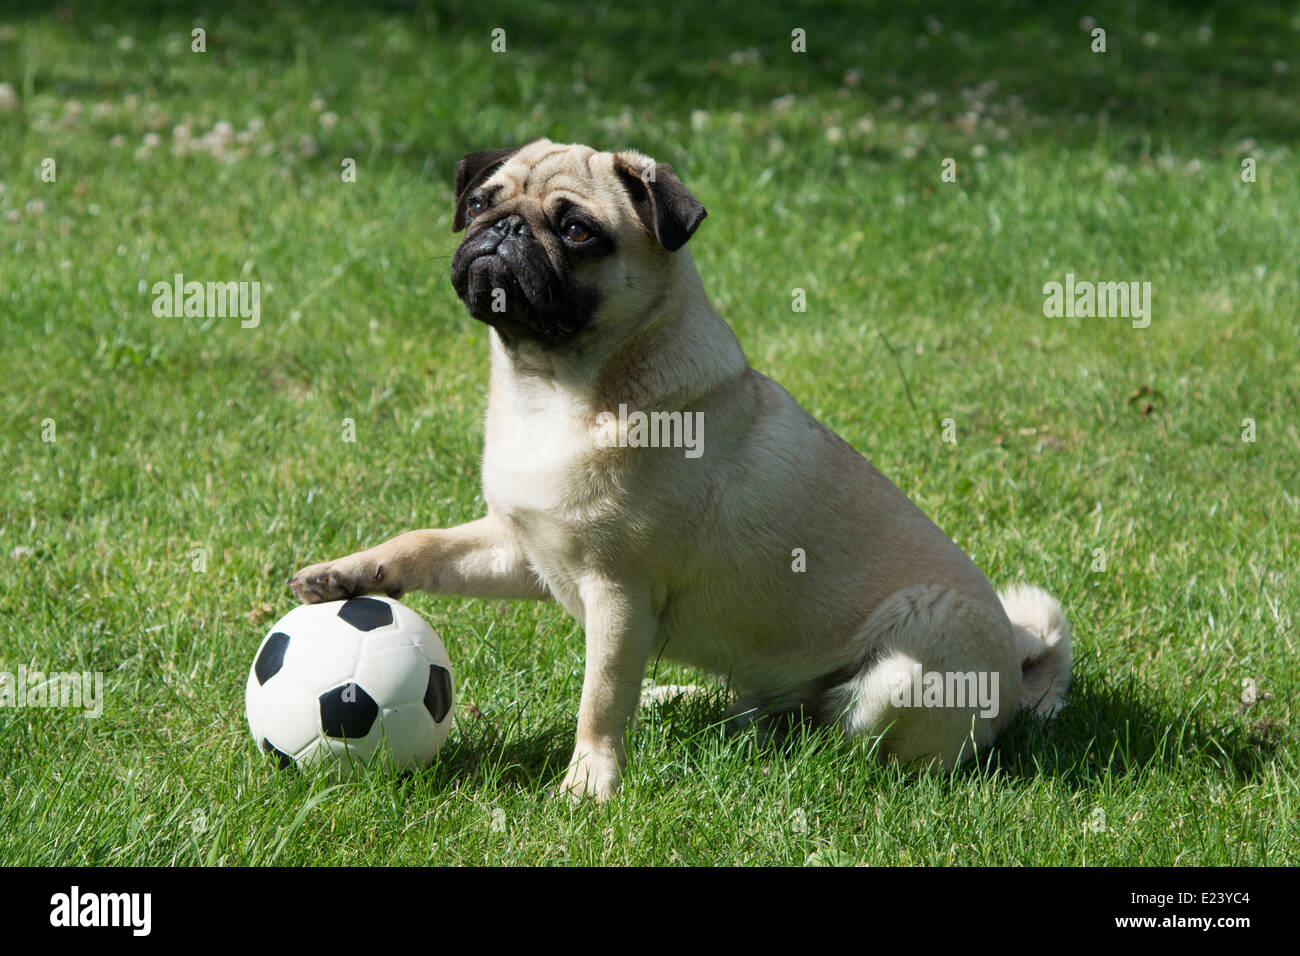 Pug with its paw on a football Stock Photo